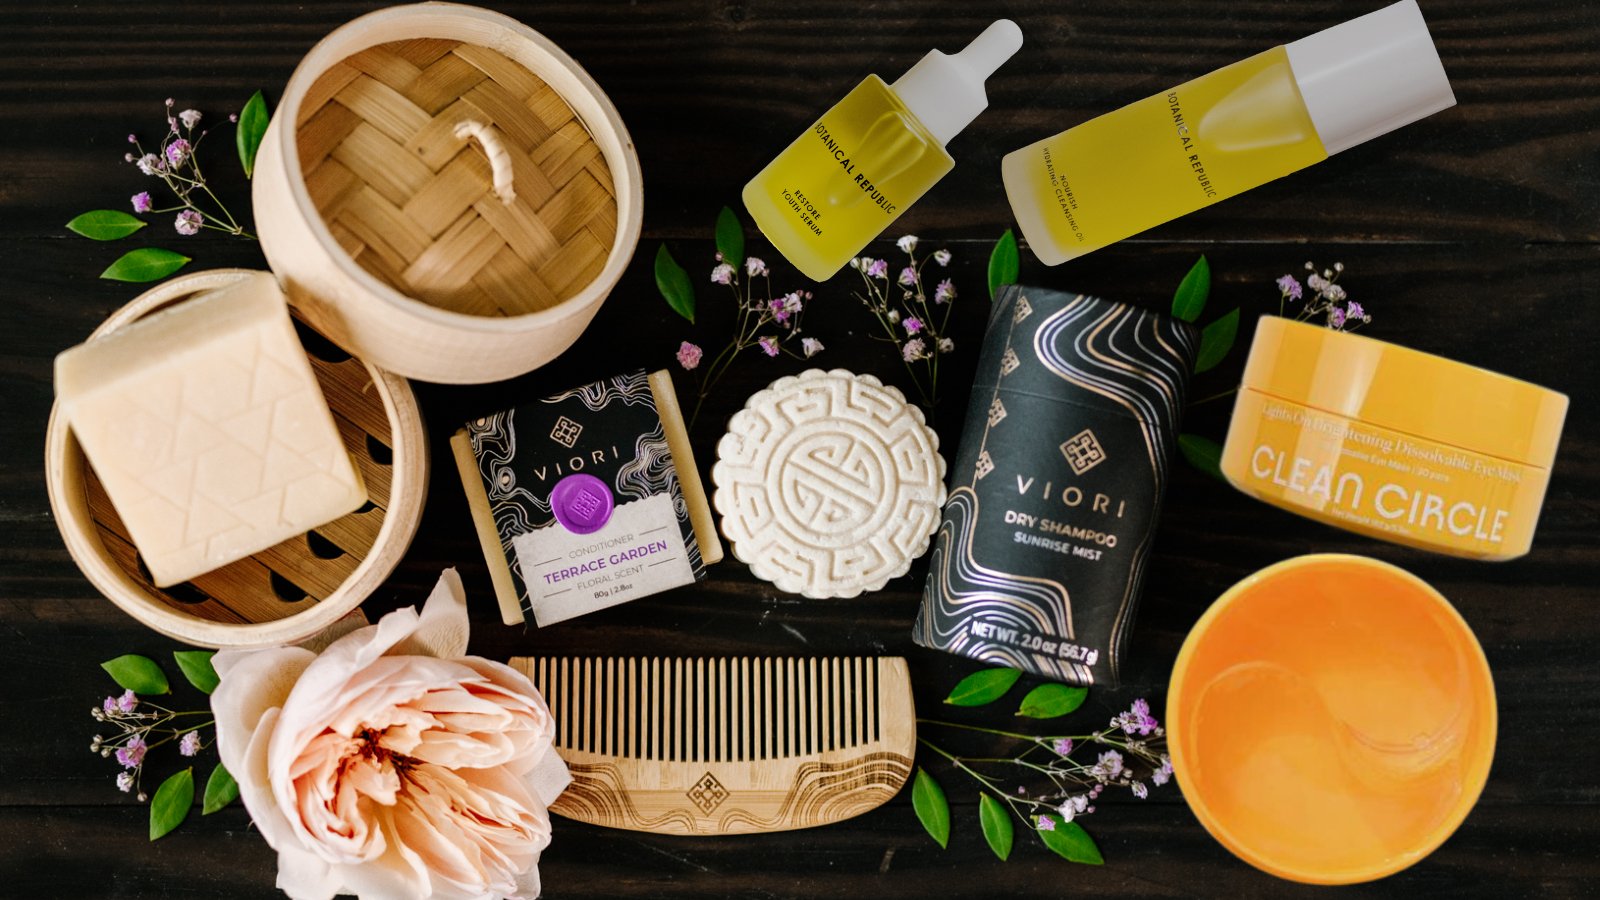 ENTER OUR FALL GIVEAWAY WITH VIORI & CLEAN CIRCLE - Botanical Republic